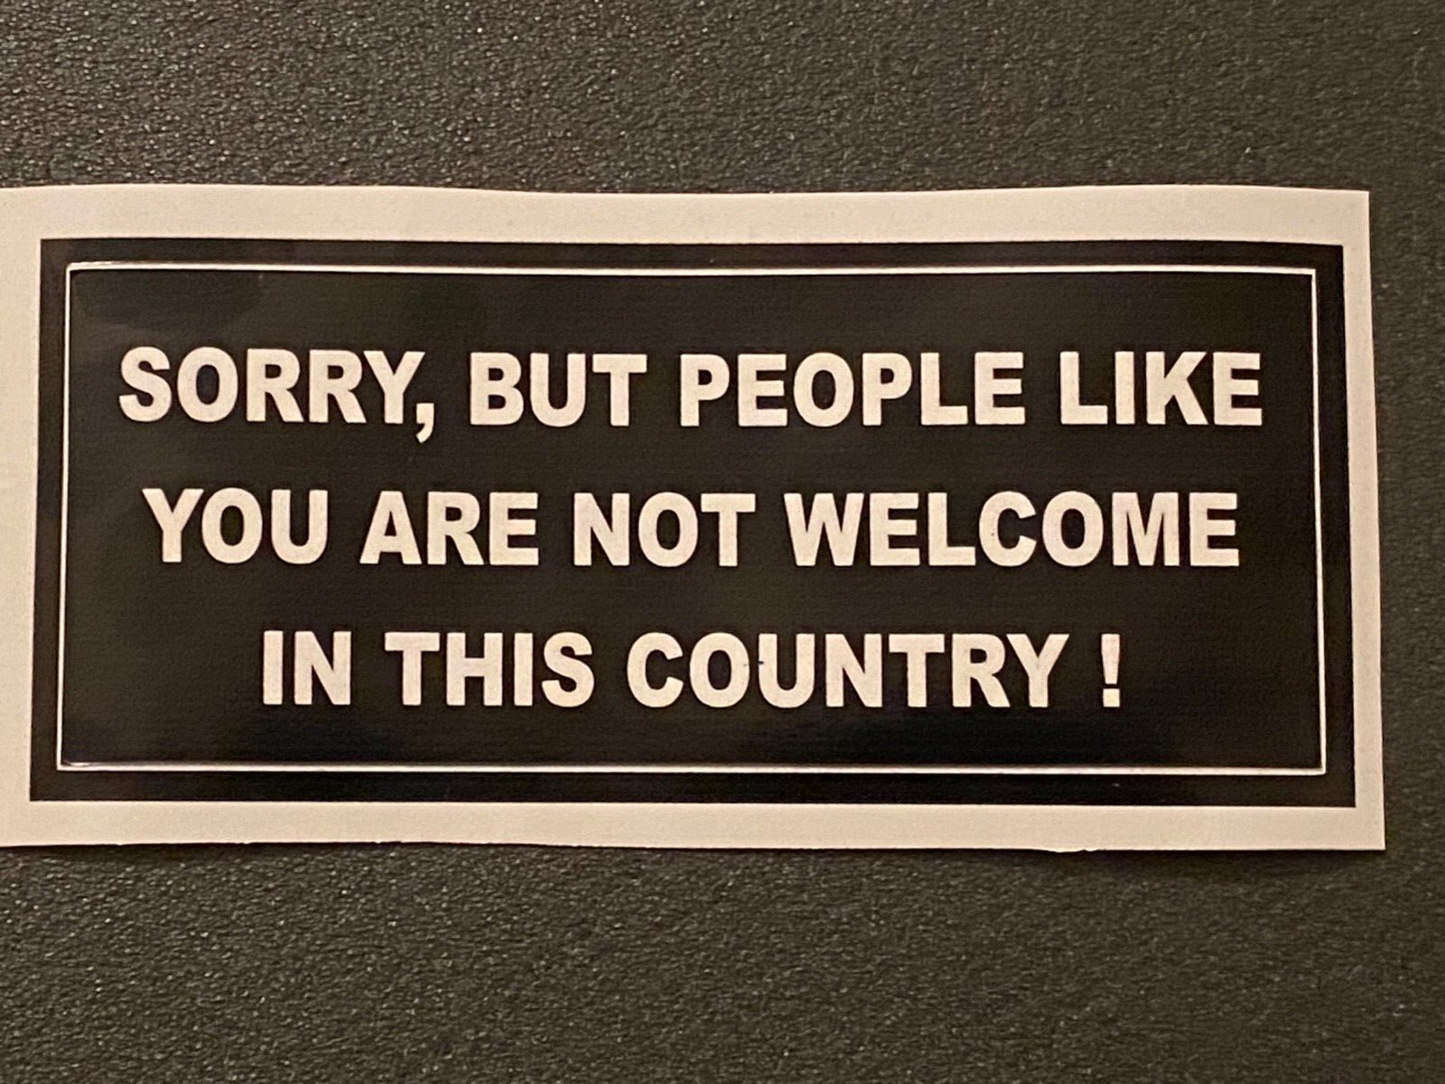 Aufkleber "SORRY, BUT PEOPLE LIKE YOU ARE NOT WELCOME..."  BUMPER STICKER DECAL